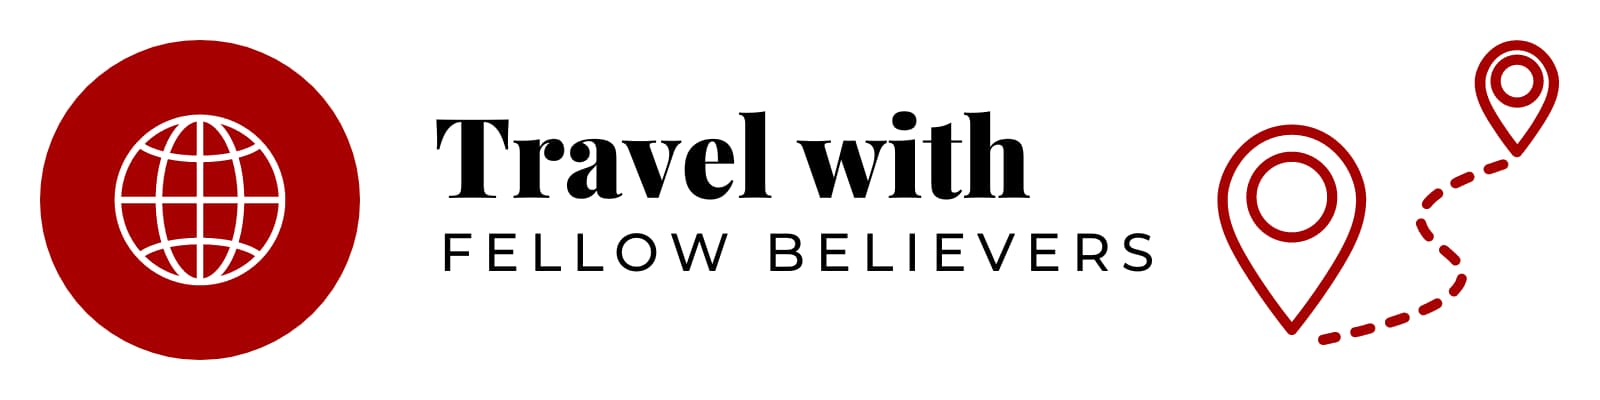 Travel-with-Fellow-Believers